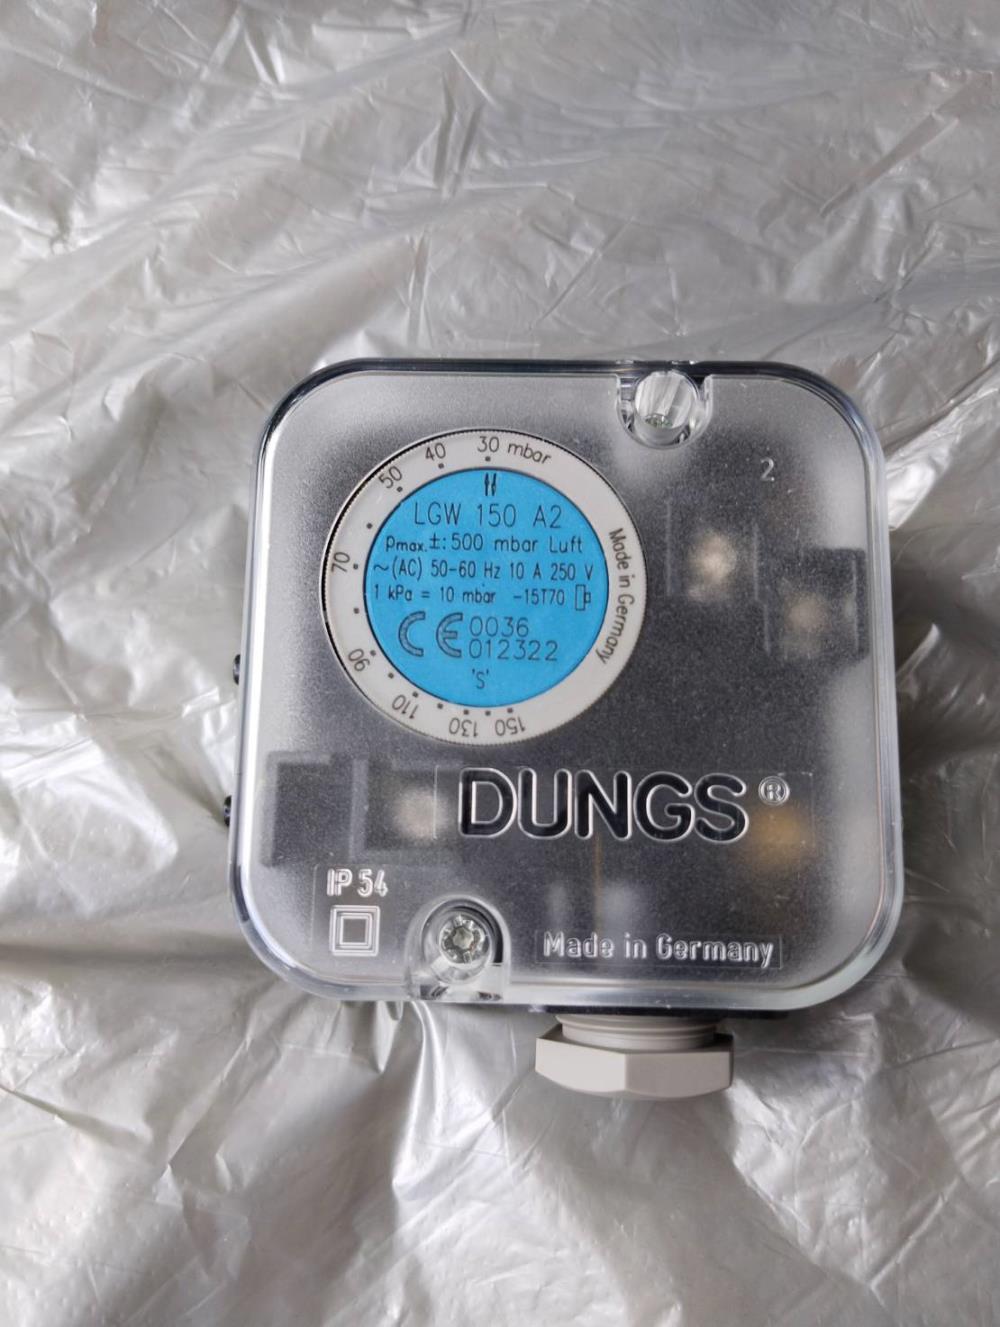 "DUNGS" Pressure Switch LGW 150 A2